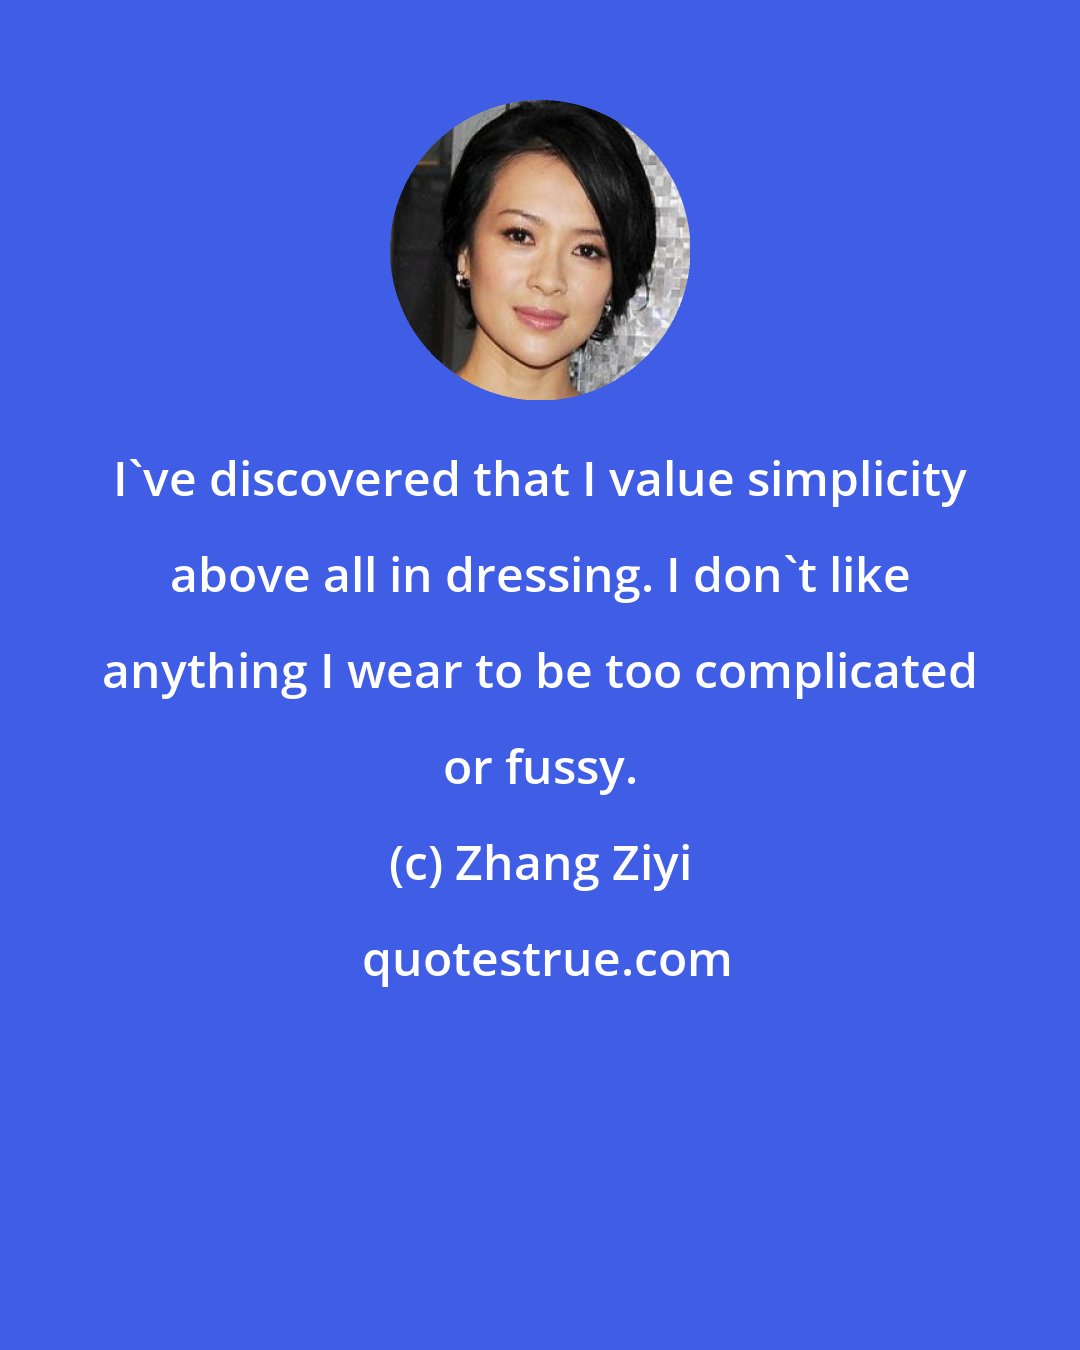 Zhang Ziyi: I've discovered that I value simplicity above all in dressing. I don't like anything I wear to be too complicated or fussy.